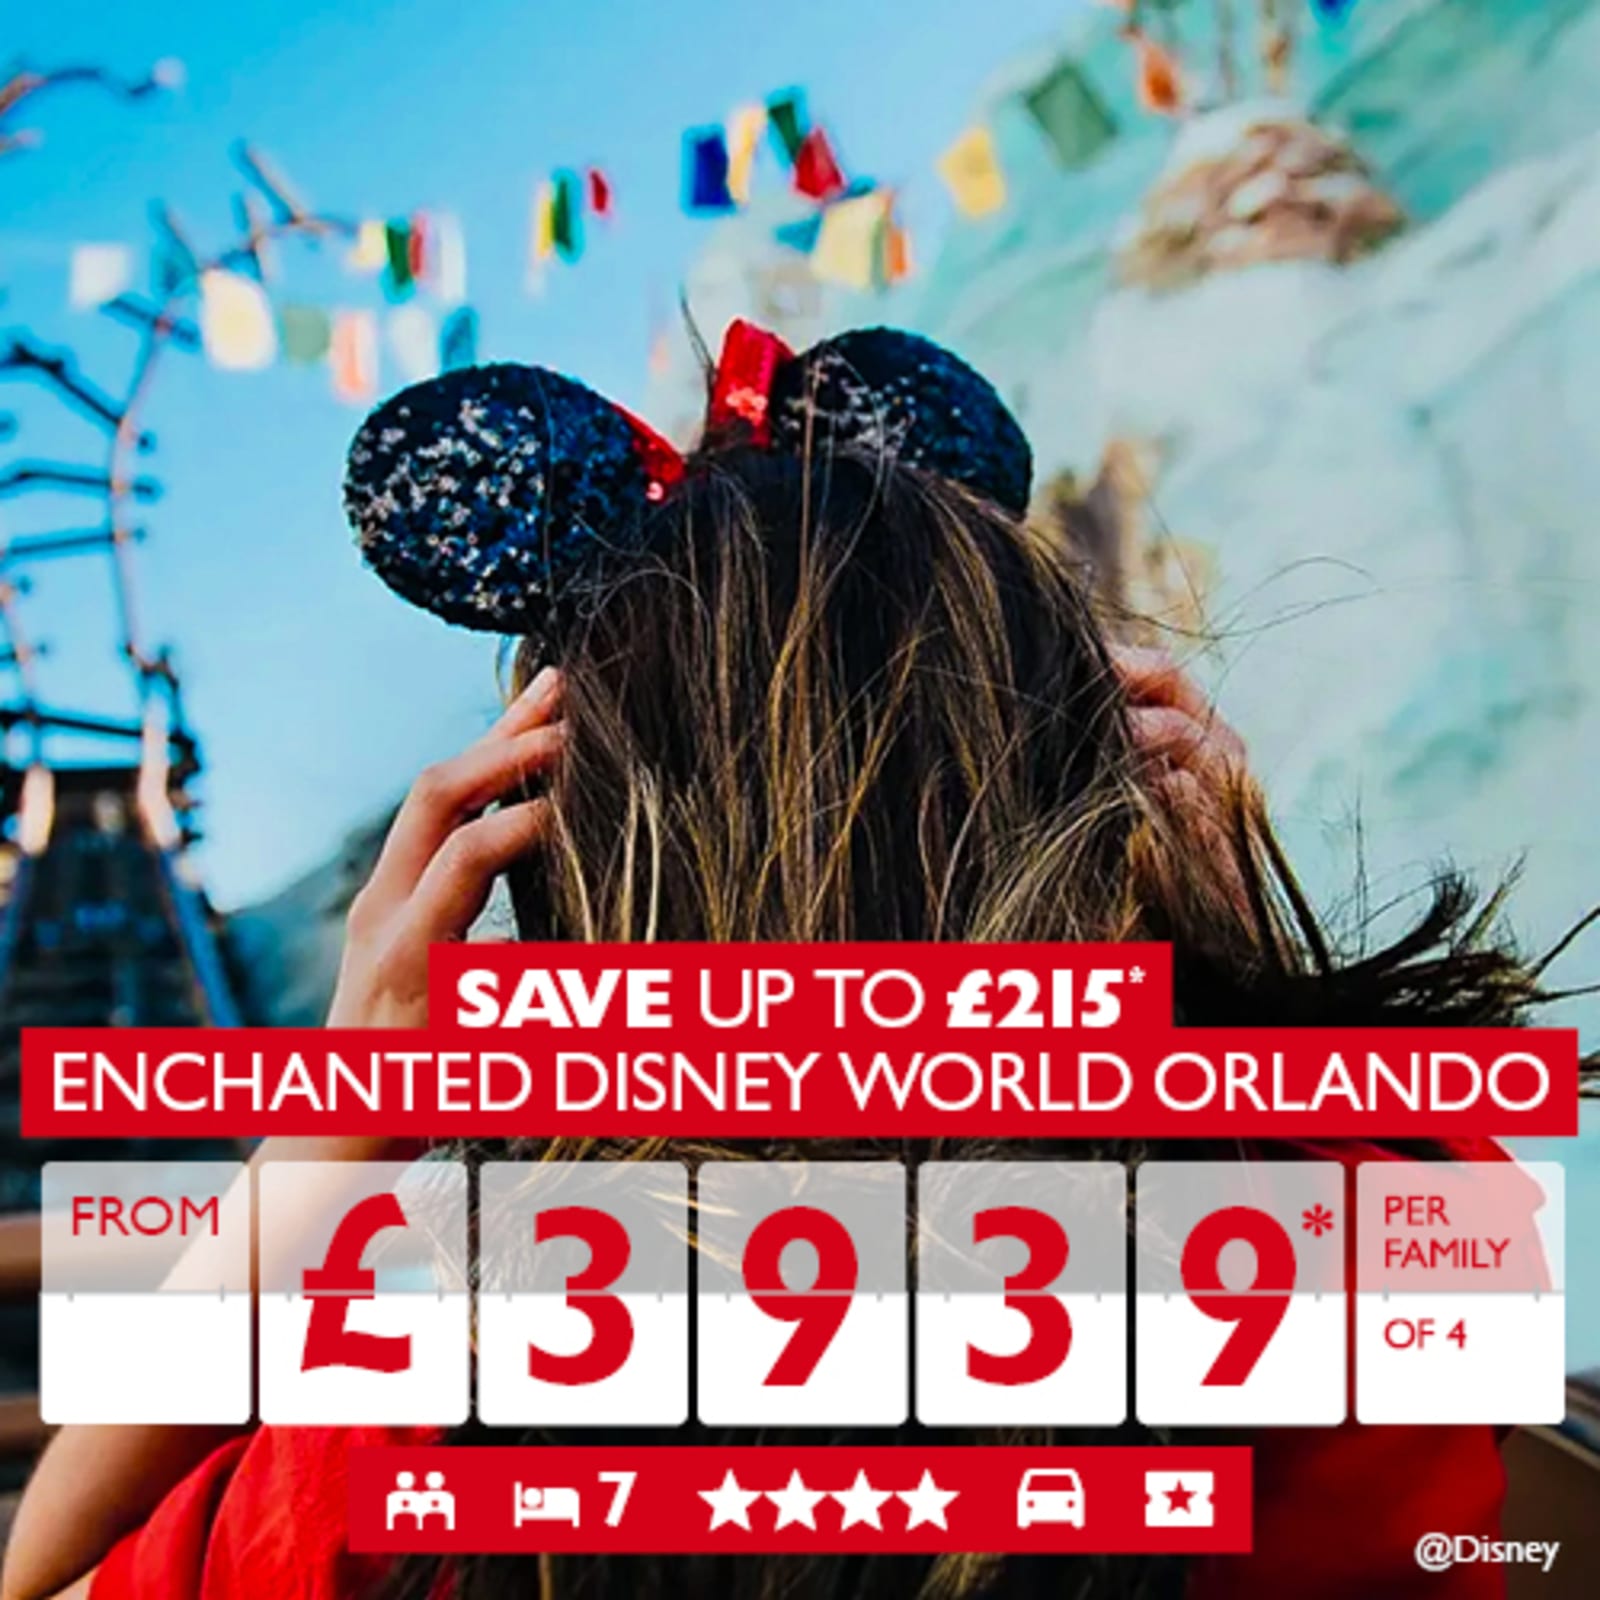 Save up to £215* Enchanted Disney World Orlando from £3939* per family of 4